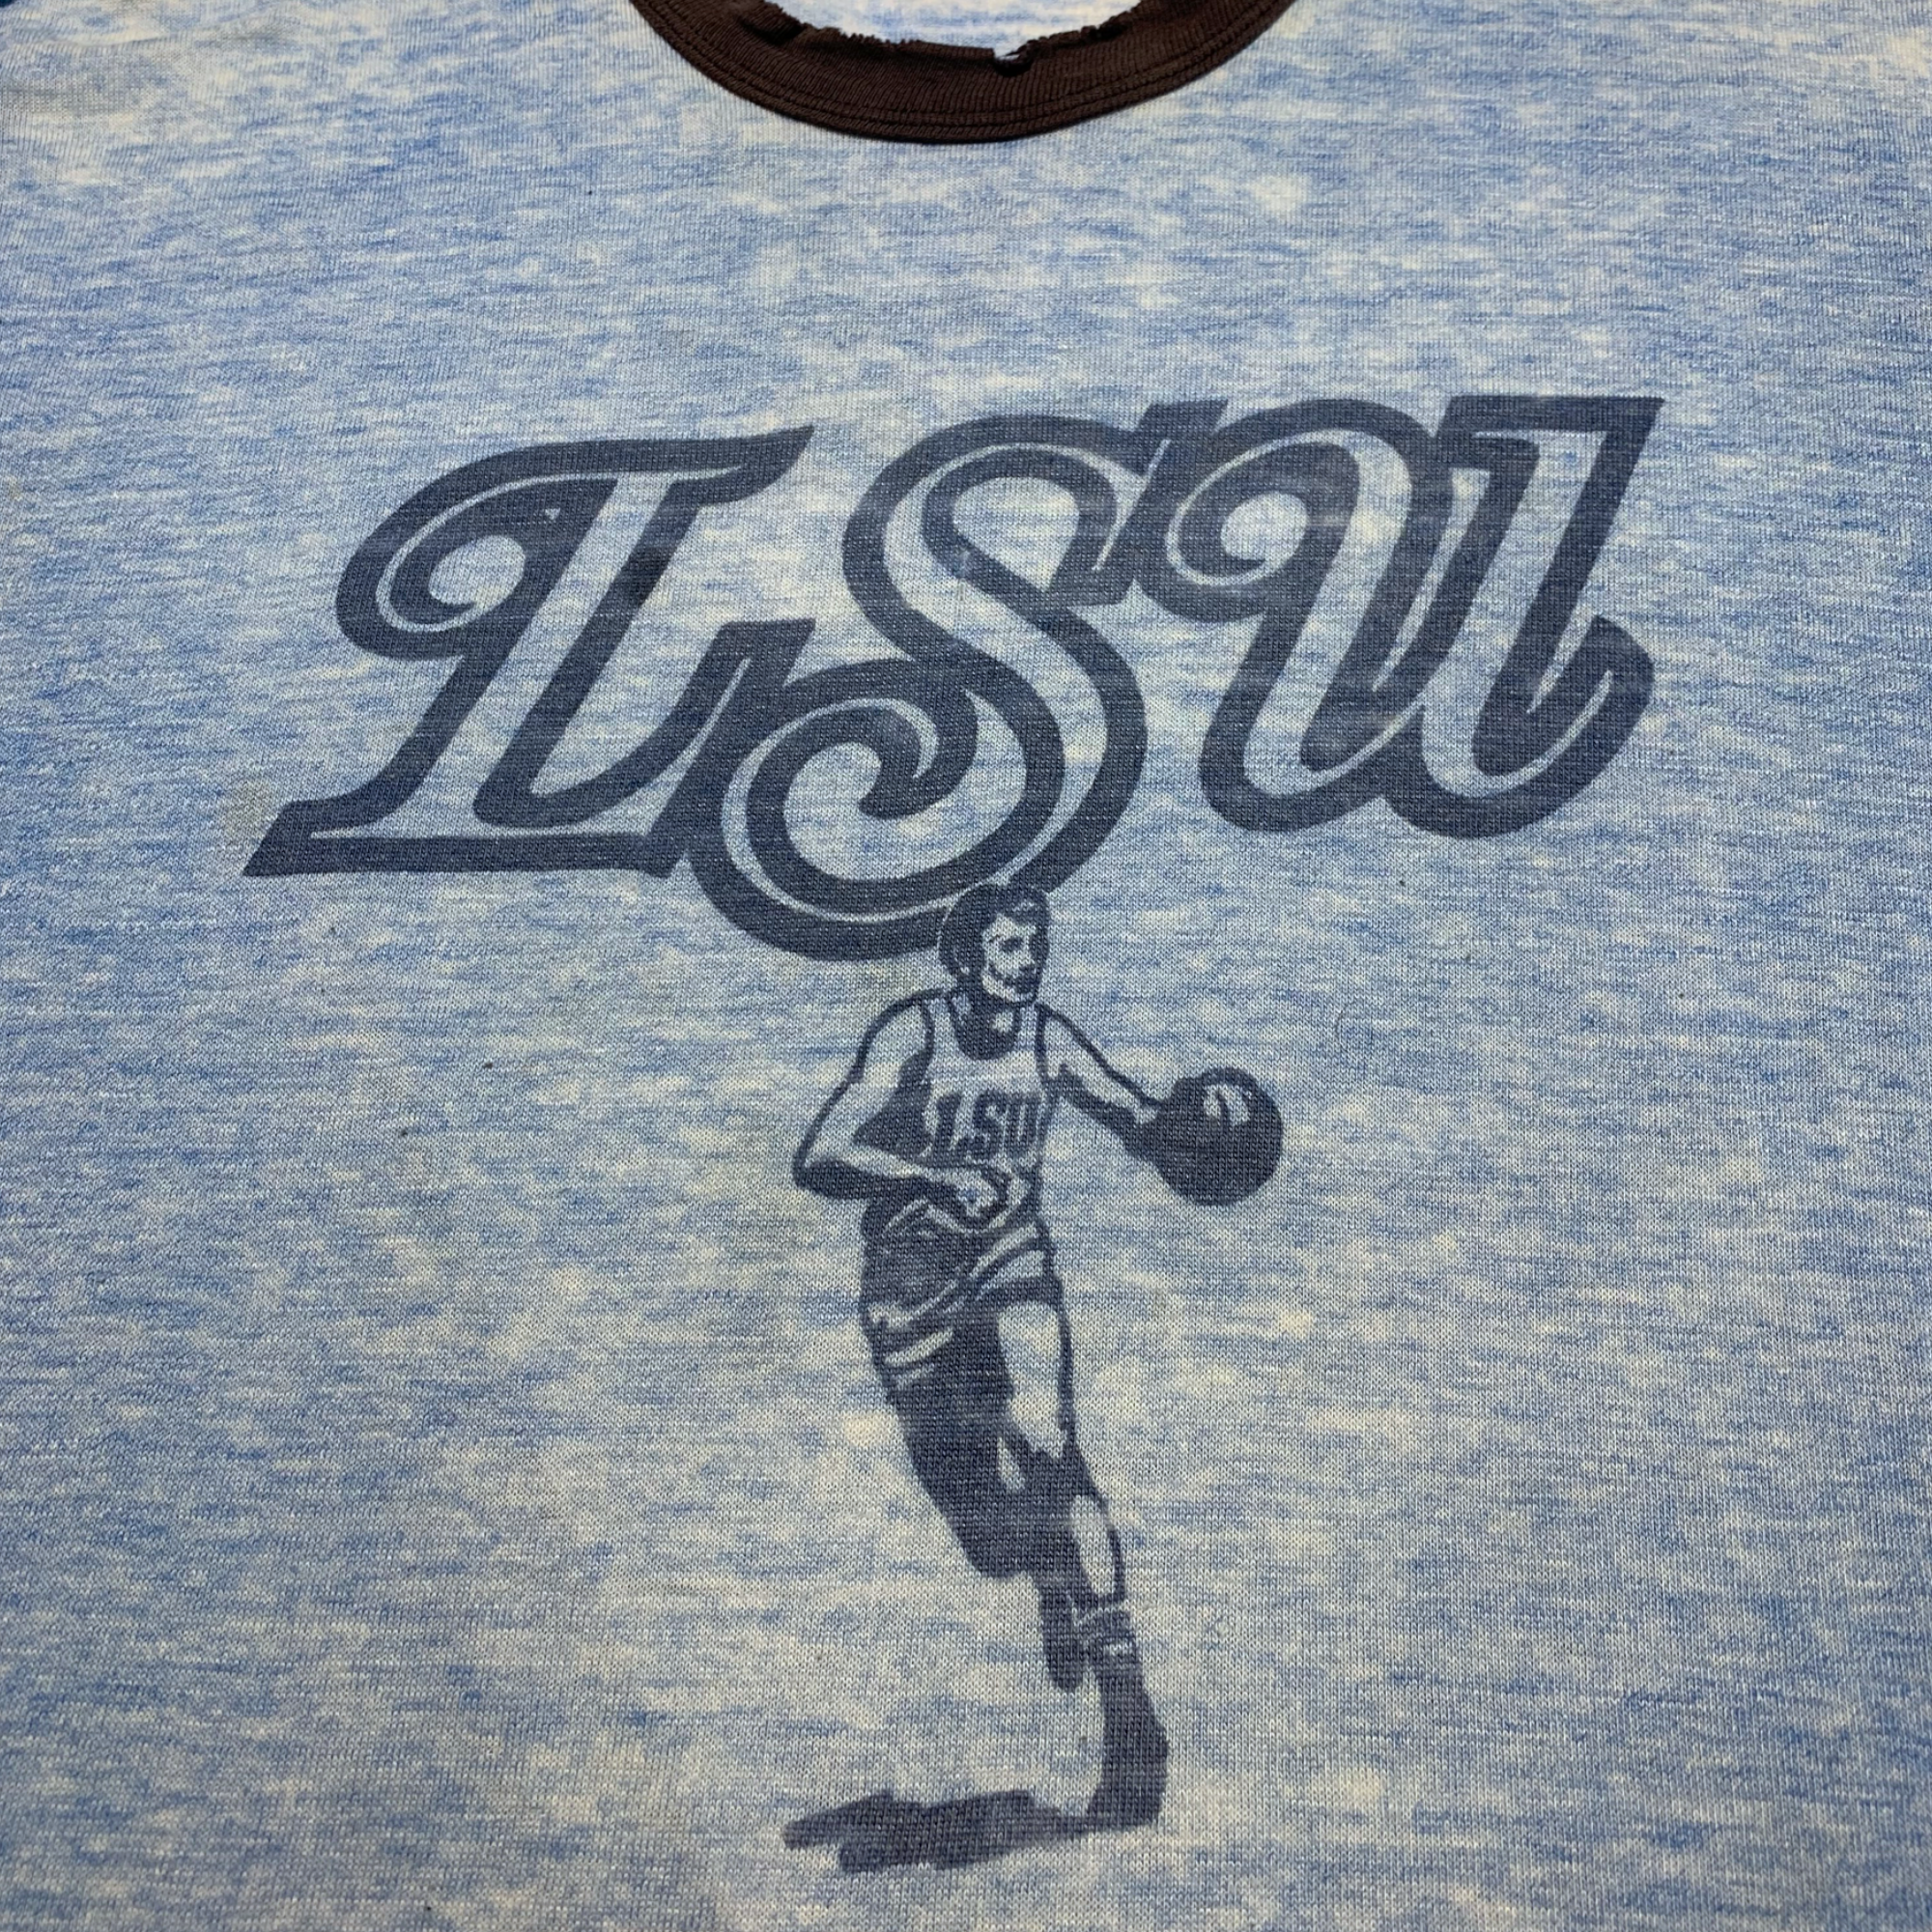 70s LSU Basketball Ringer T-Shirt Incredible Wear - Baby Blue/Faded Navy - M/L